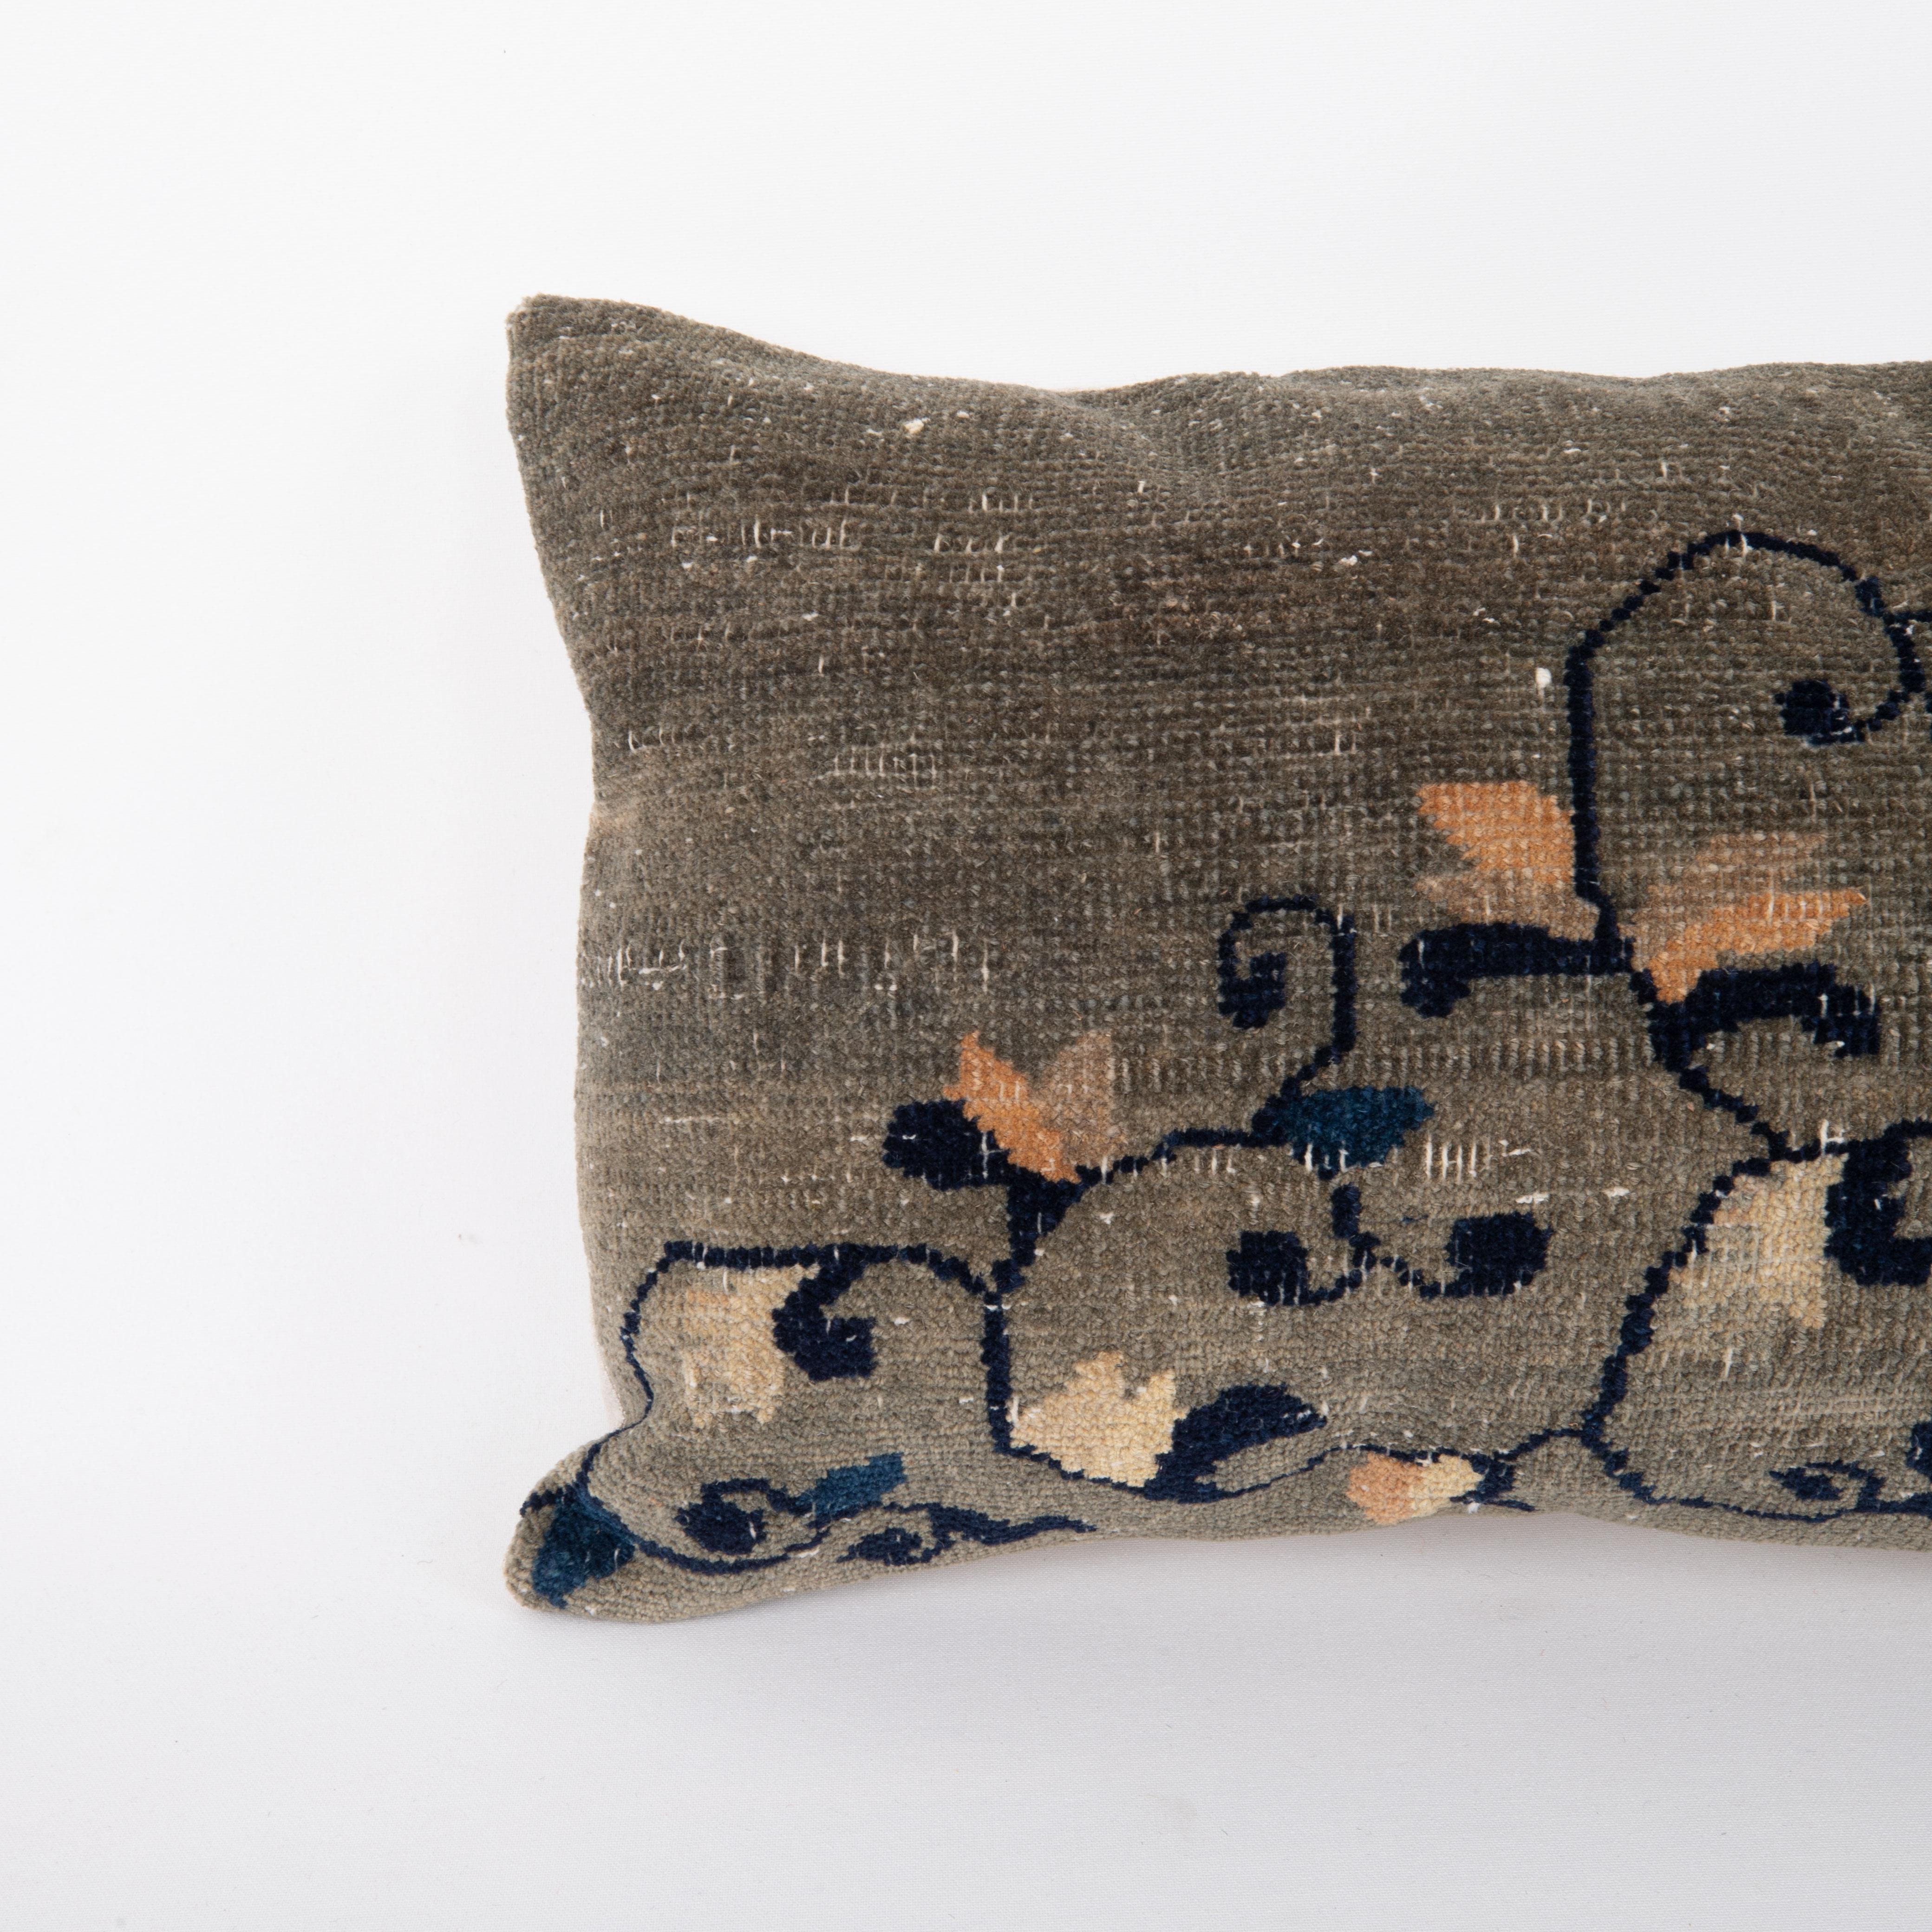 Hand-Woven Pillow Cover Made from a Chinese Art Deco Rug, early 20th C.